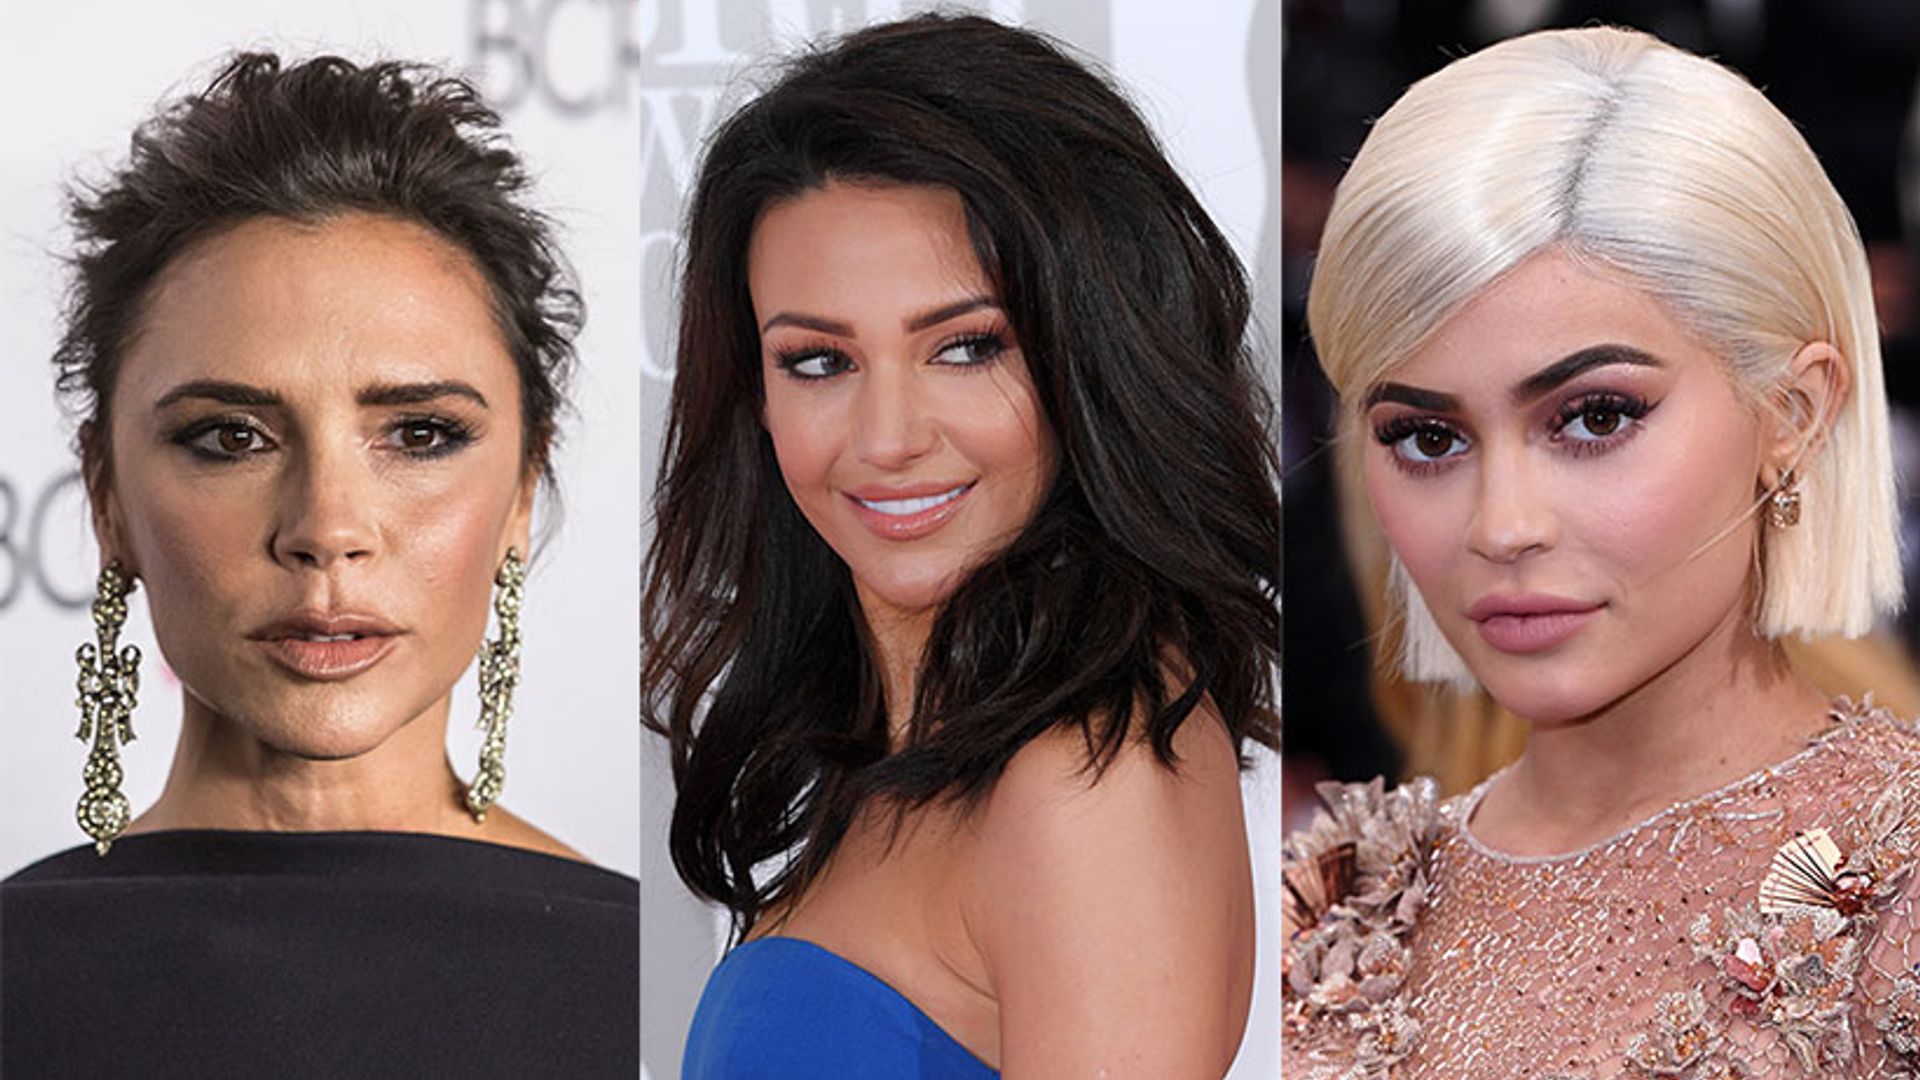 The beauty products celebrities are obsessed with...